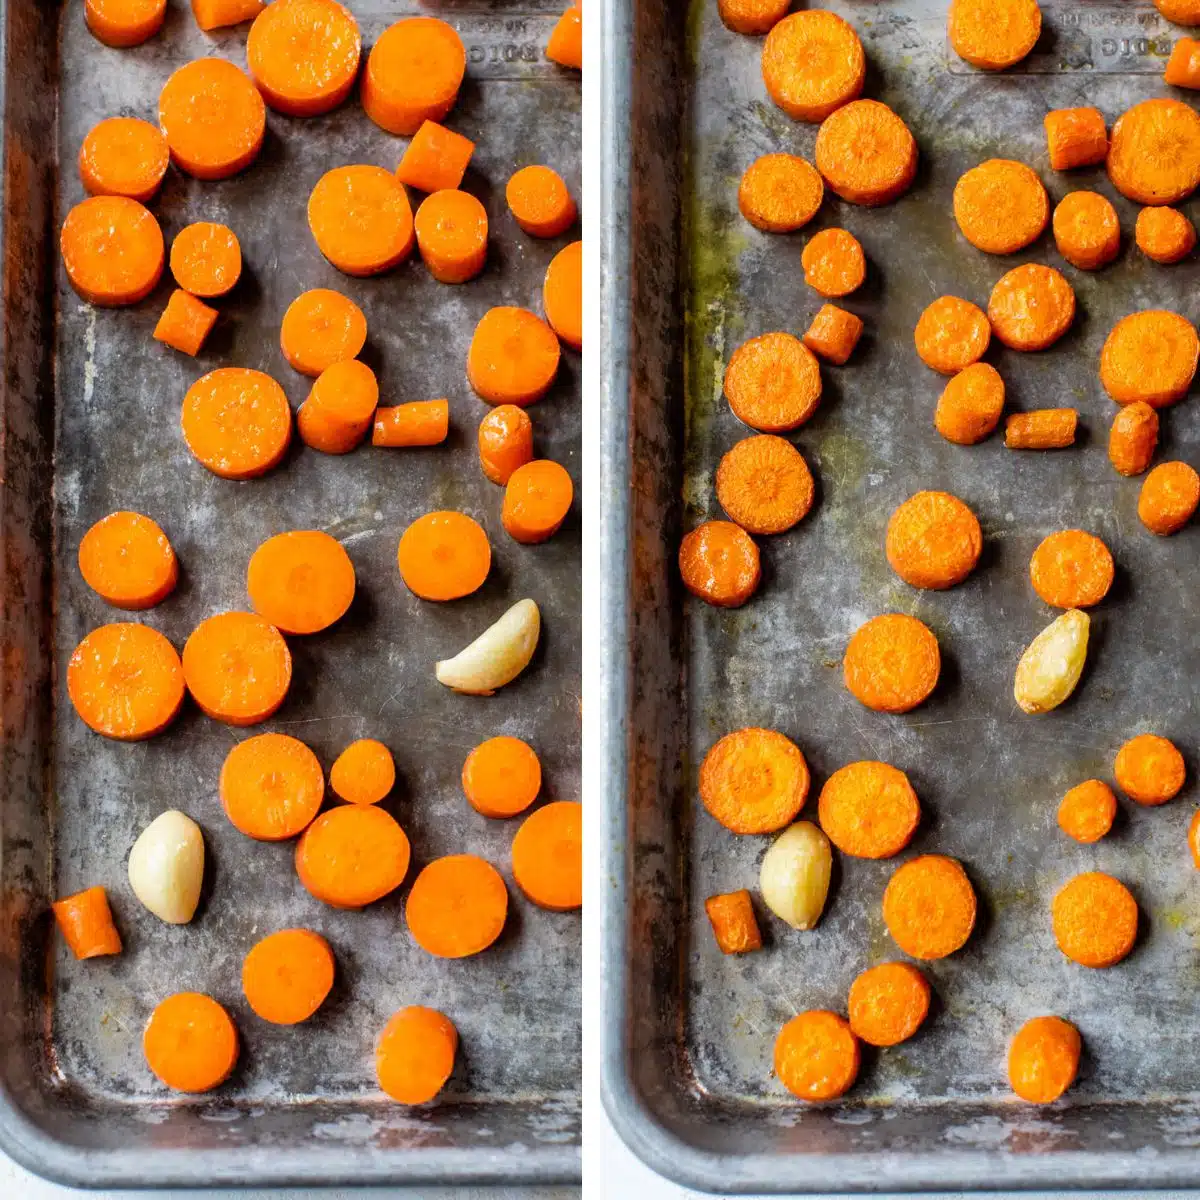 2 images: the left images shows sliced carrots on a baking sheet and the right image shows the carrots on a baking sheet having been roasted